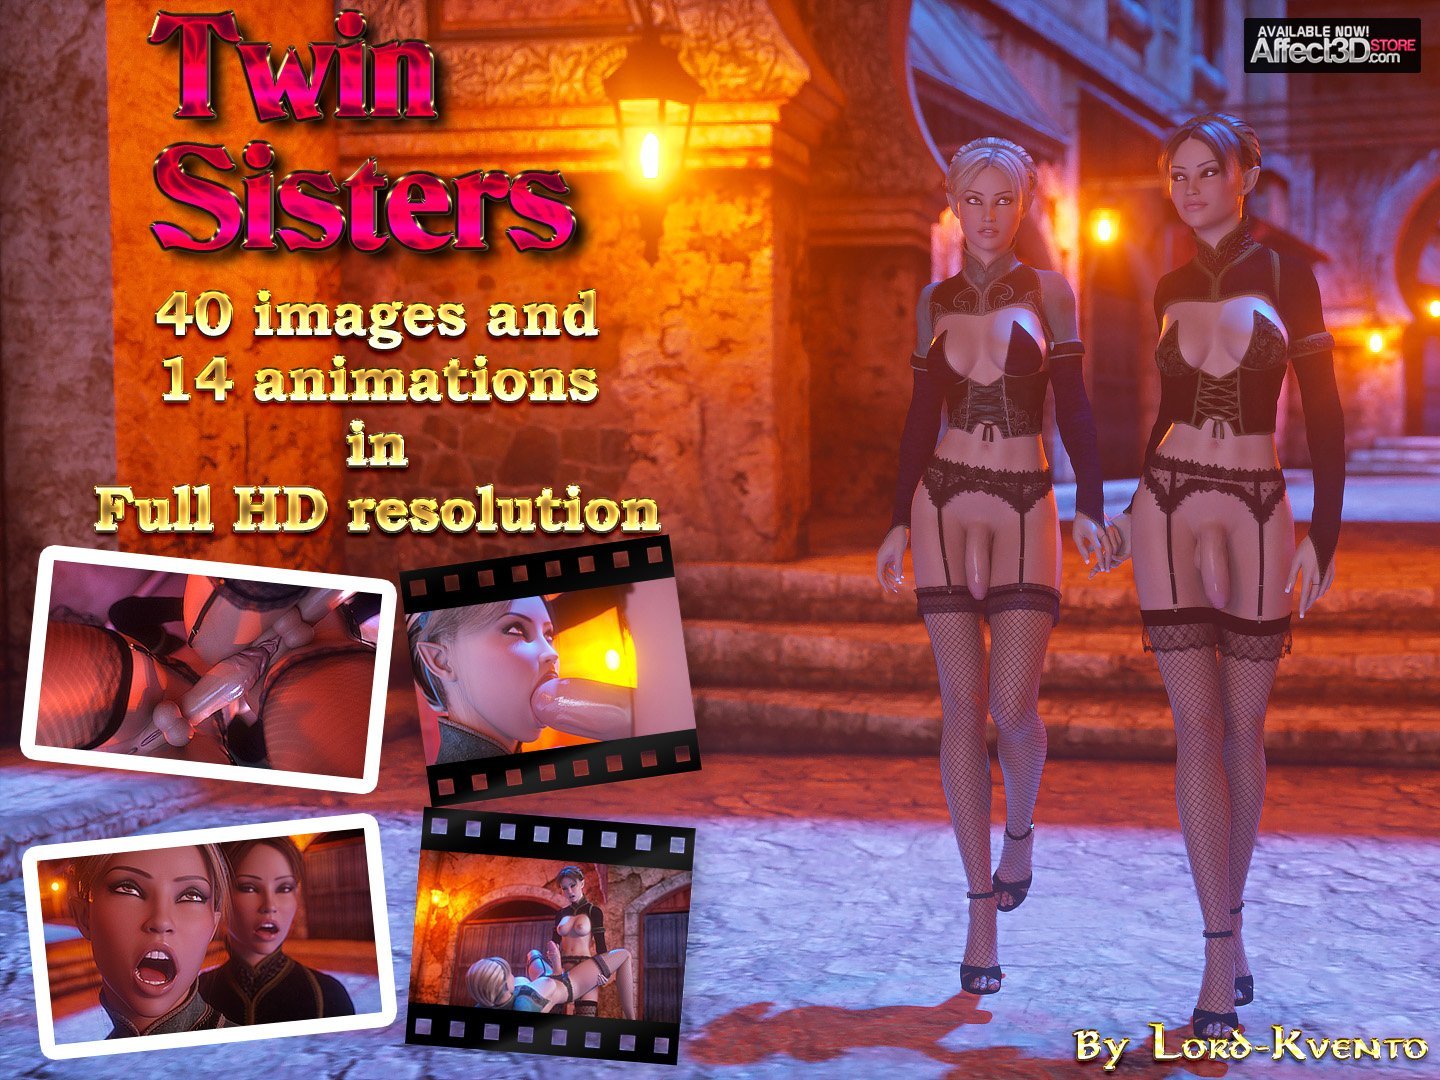 twinsisters_affect3d-main_product_image